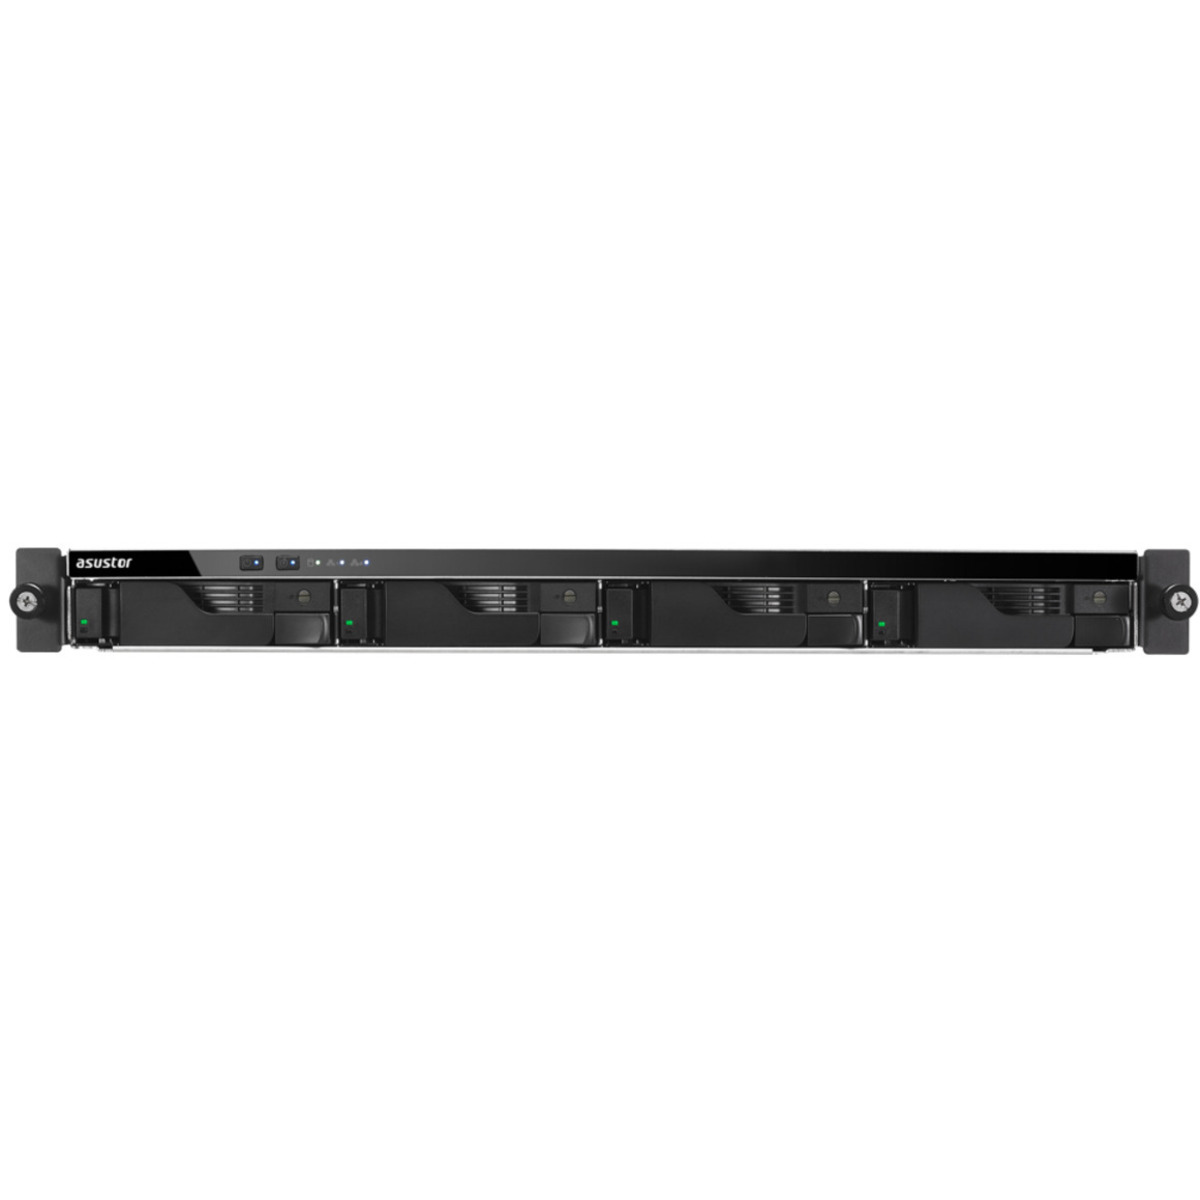 ASUSTOR LOCKERSTOR 4RS AS6504RS 16tb 4-Bay RackMount Multimedia / Power User / Business NAS - Network Attached Storage Device 4x4tb Seagate BarraCuda ST4000DM004 3.5 7200rpm SATA 6Gb/s HDD CONSUMER Class Drives Installed - Burn-In Tested - FREE RAM UPGRADE LOCKERSTOR 4RS AS6504RS